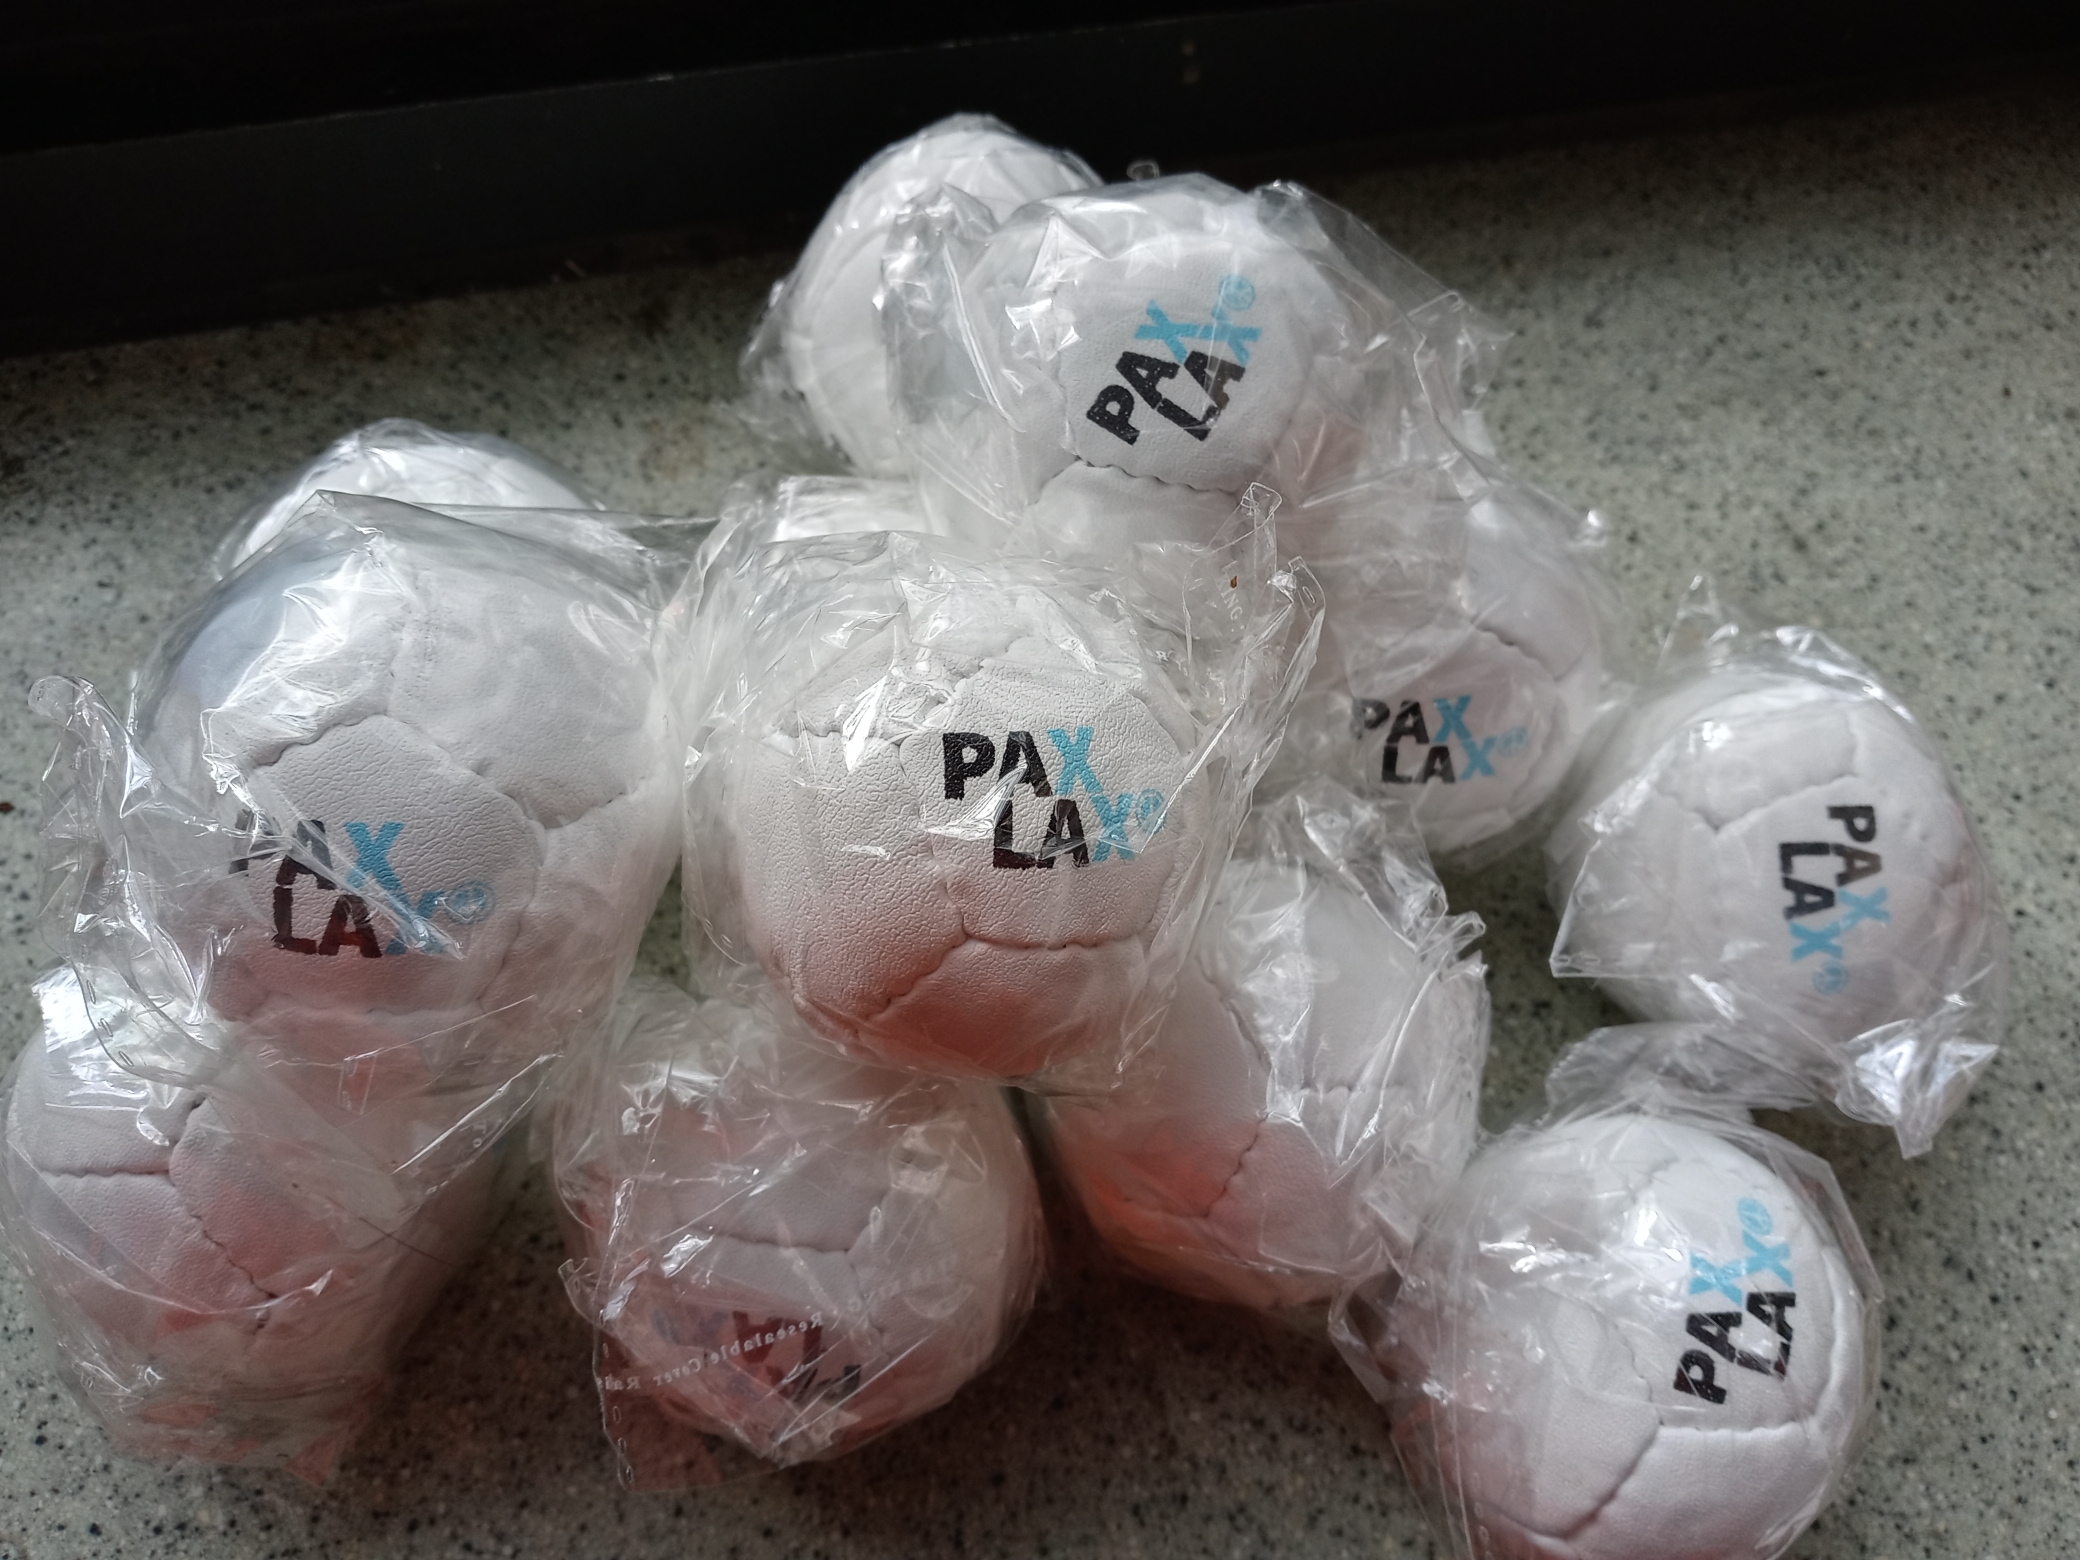 12 White PaxLax Safe Indoor Lacrosse Practice Balls, great for youth coaches & PE teachers